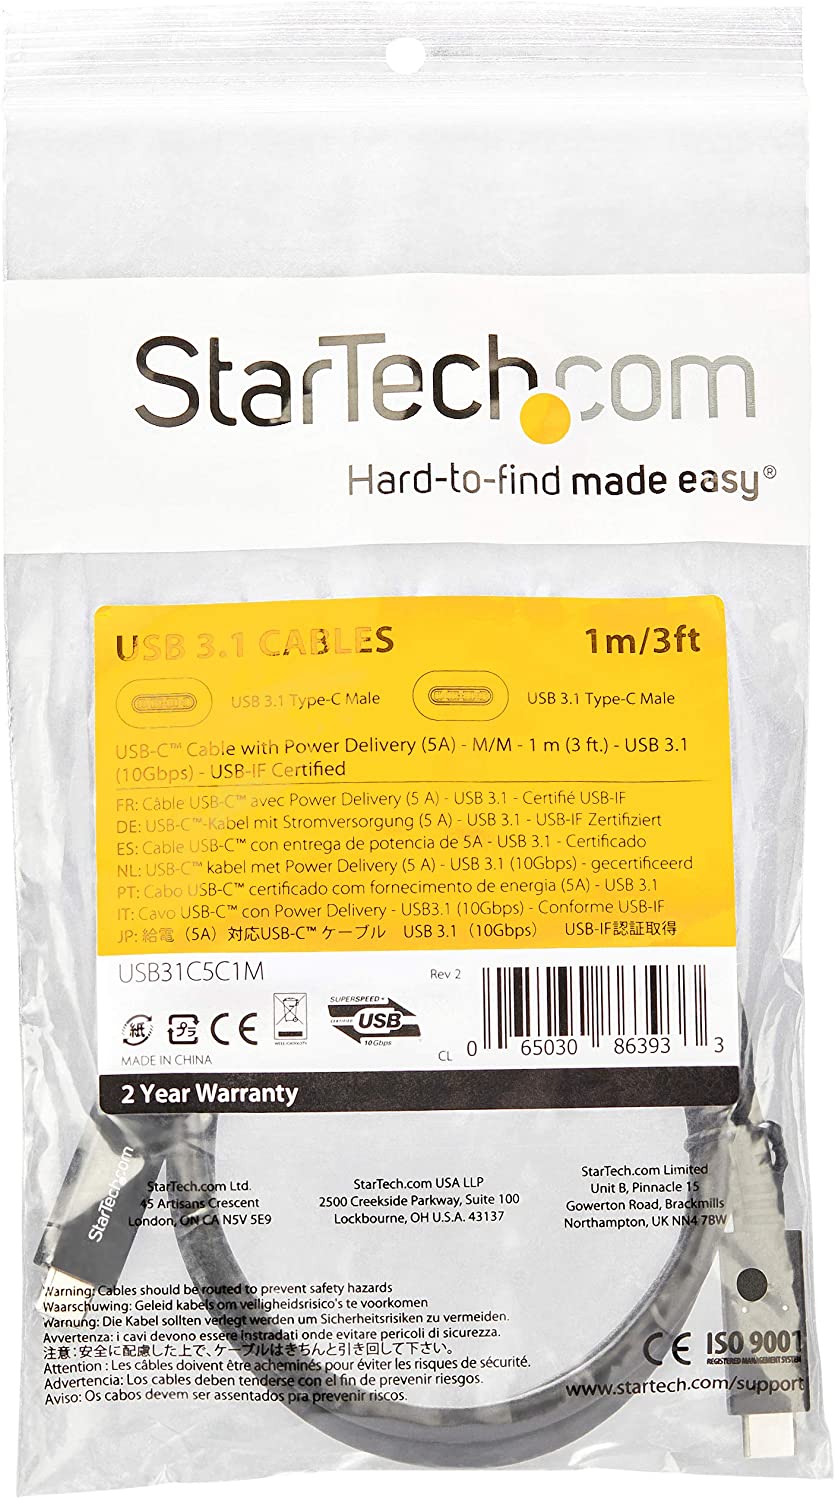 StarTech.com USB C Cable 3 ft / 1m with Power Delivery (USB PD) Power Pass Through Charging USB to USB Cord (USB31C5C1M)